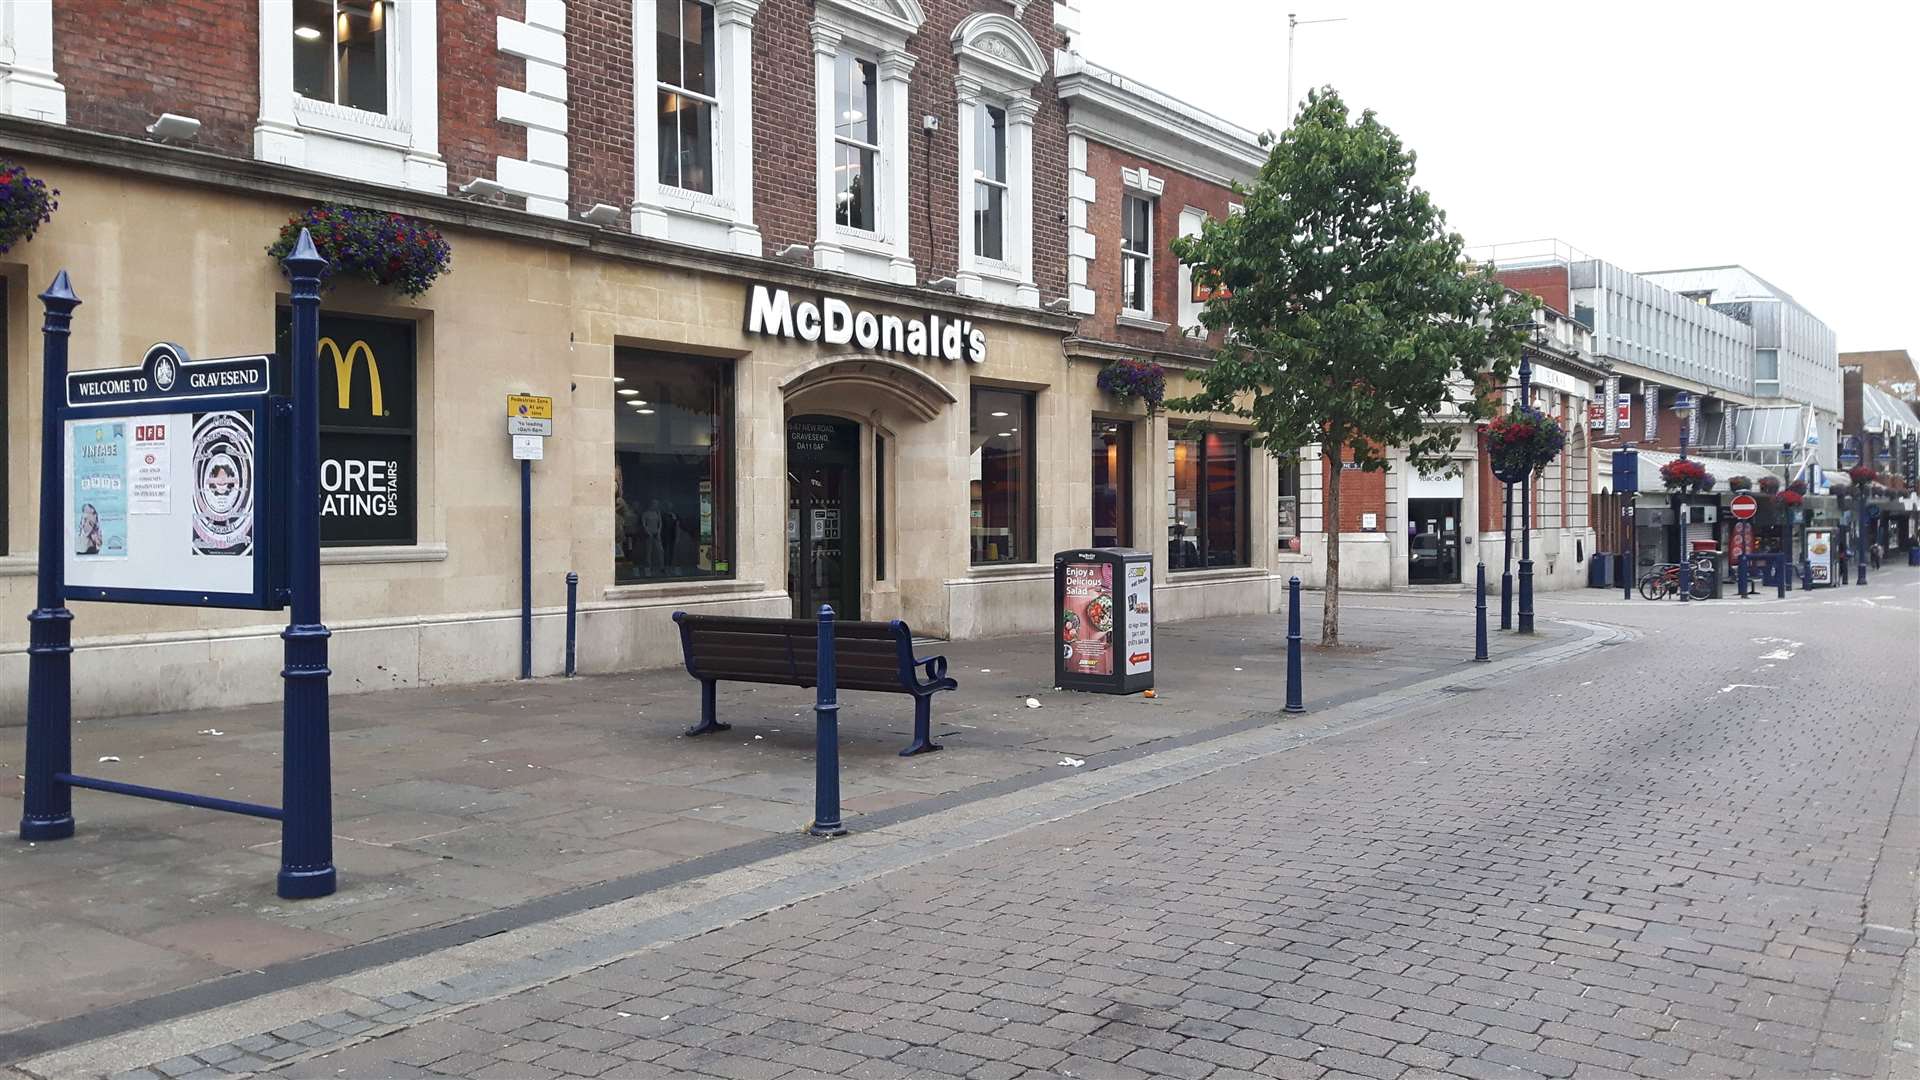 The incident happened at McDonald's in New Road, Gravesend.